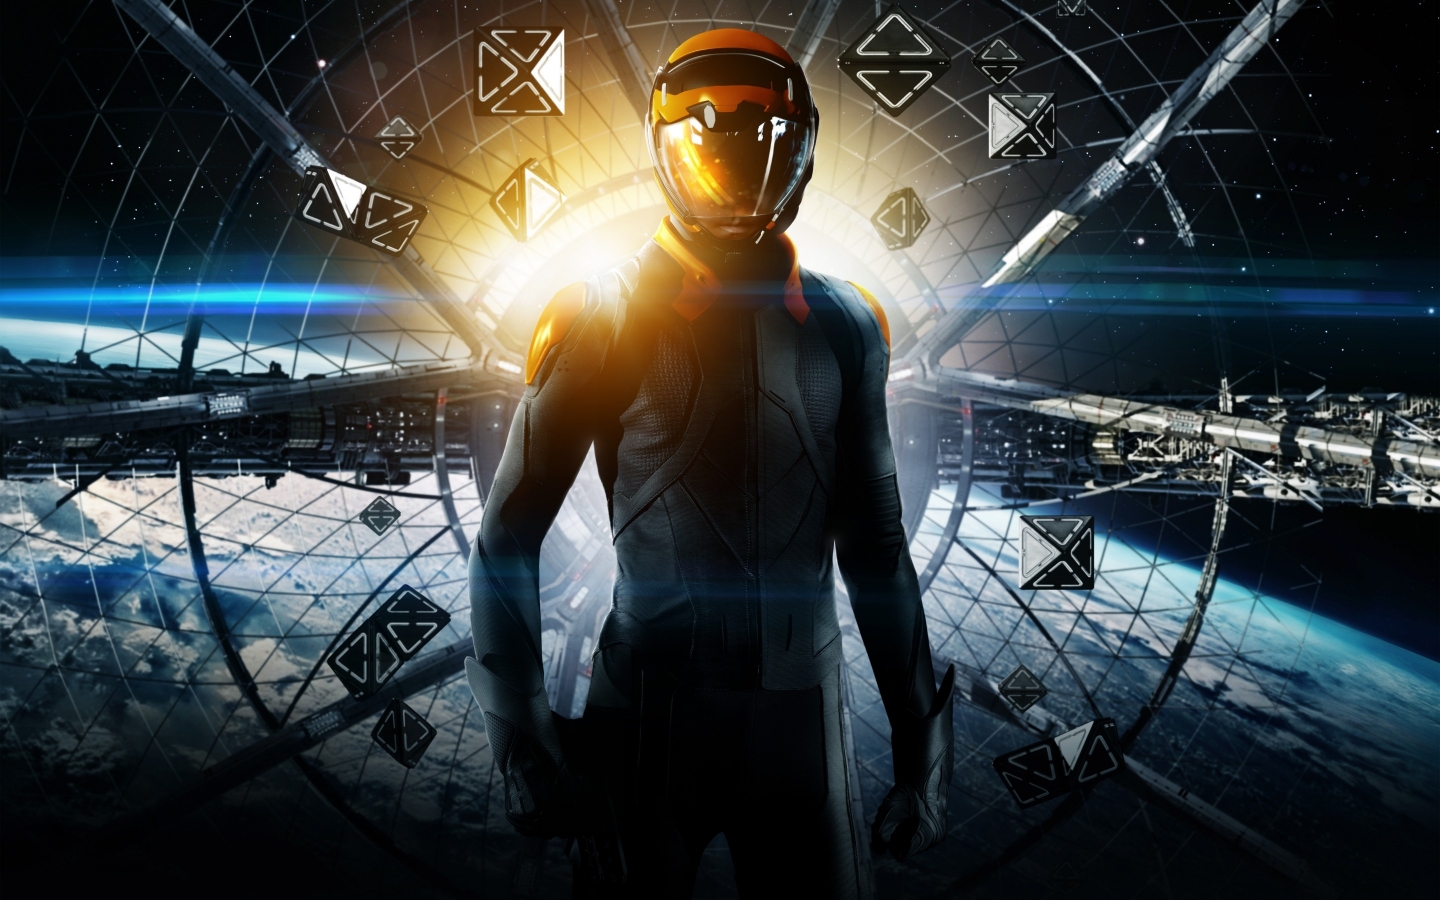 Ender's Game Poster for 1440 x 900 widescreen resolution